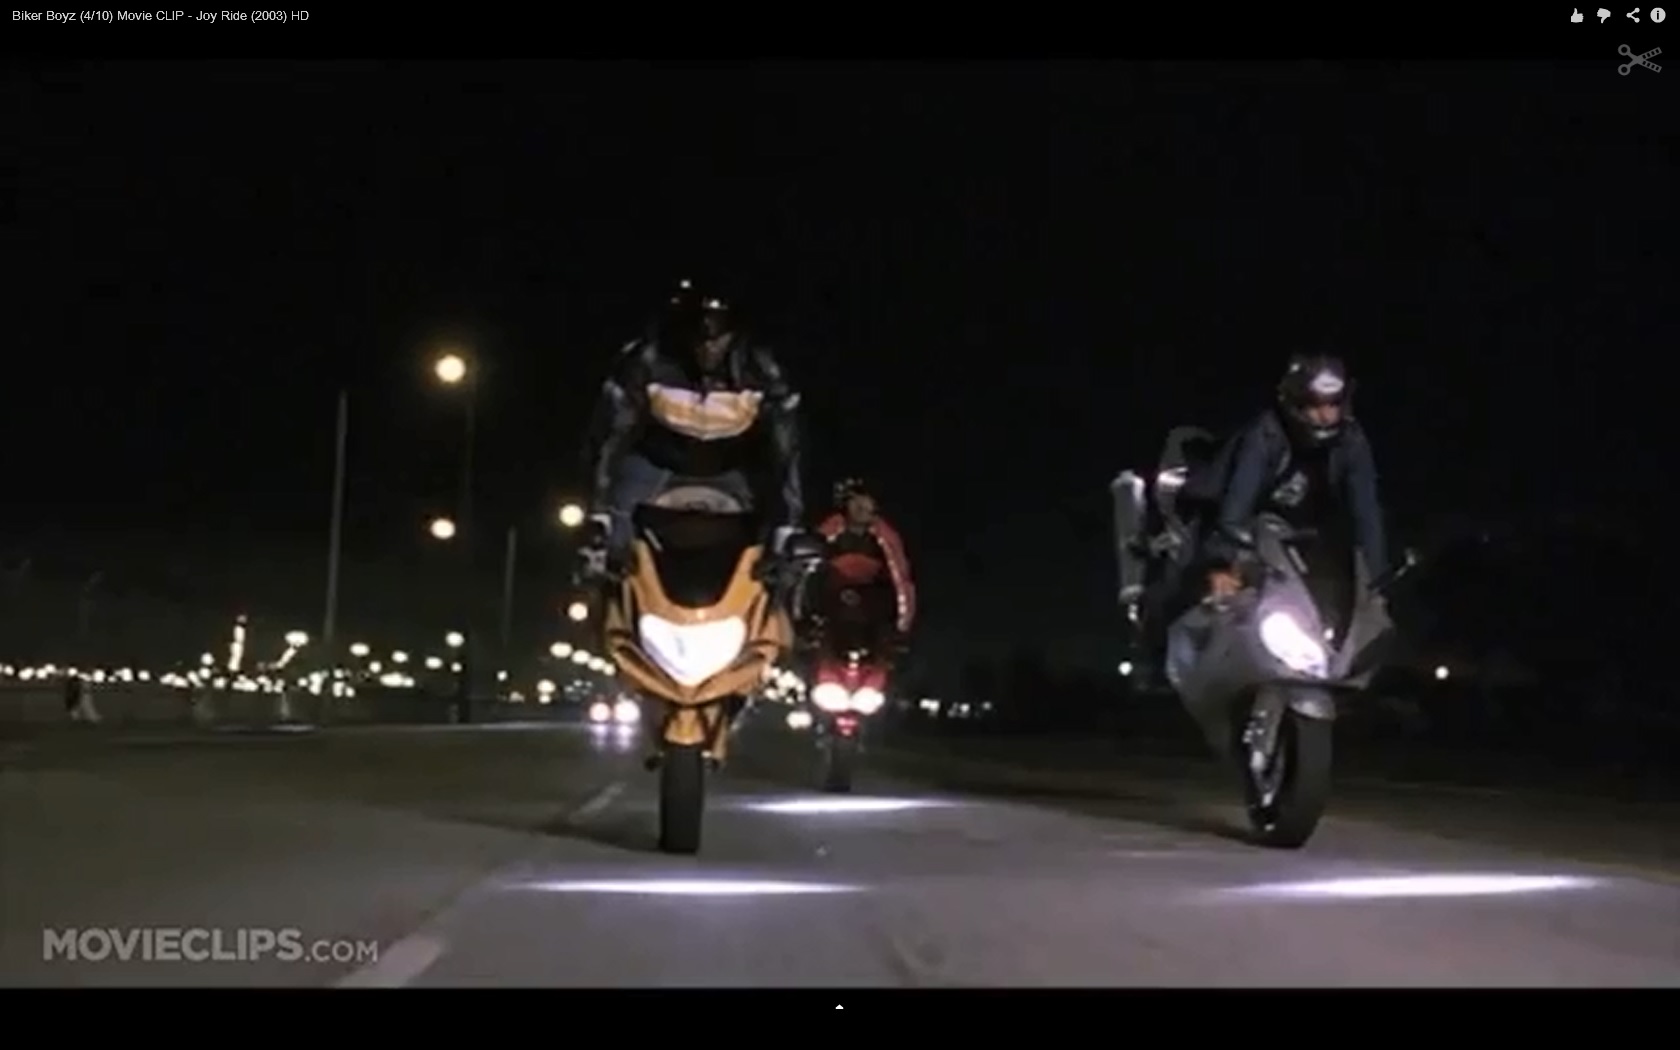 Top 10 things movies get wrong about motorcycles